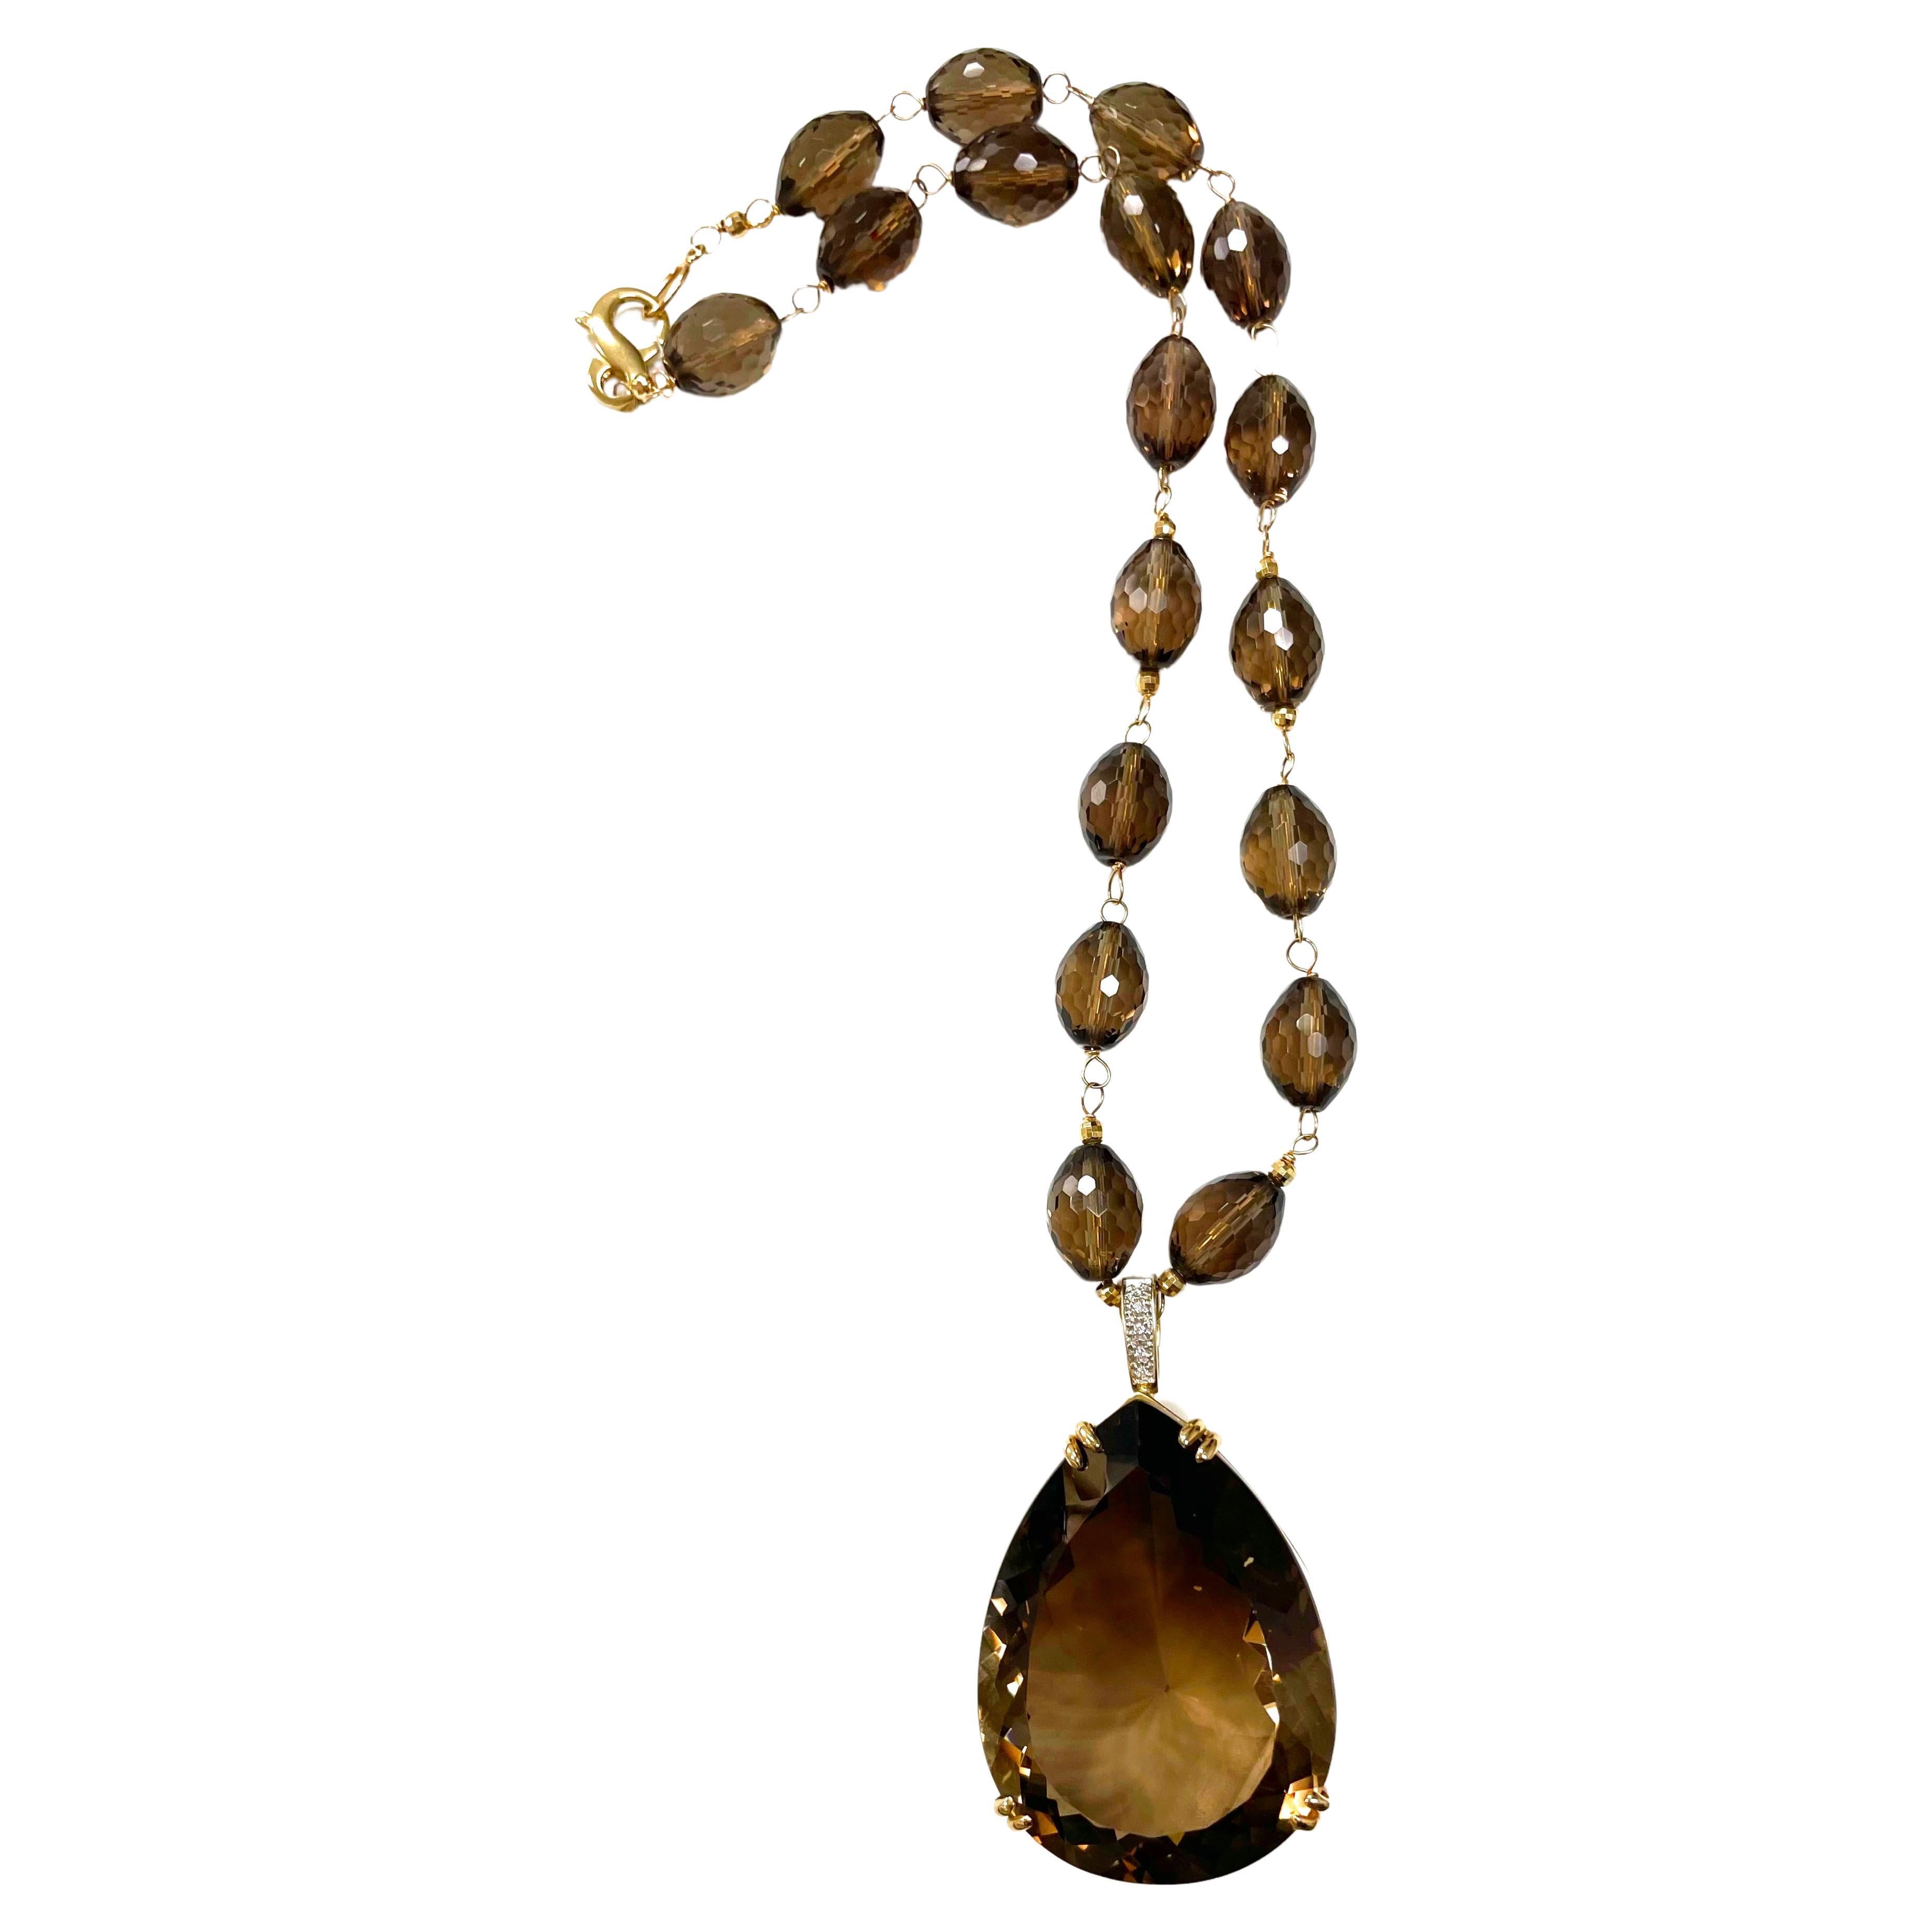 Description
Beautiful, oval faceted Smoky Quartz necklace adorned with a stunning pear shape pendant and accented with 14k yellow gold faceted balls. This dramatically large faceted Smoky Quartz pendant, with pave diamond enhancer, is removable; but